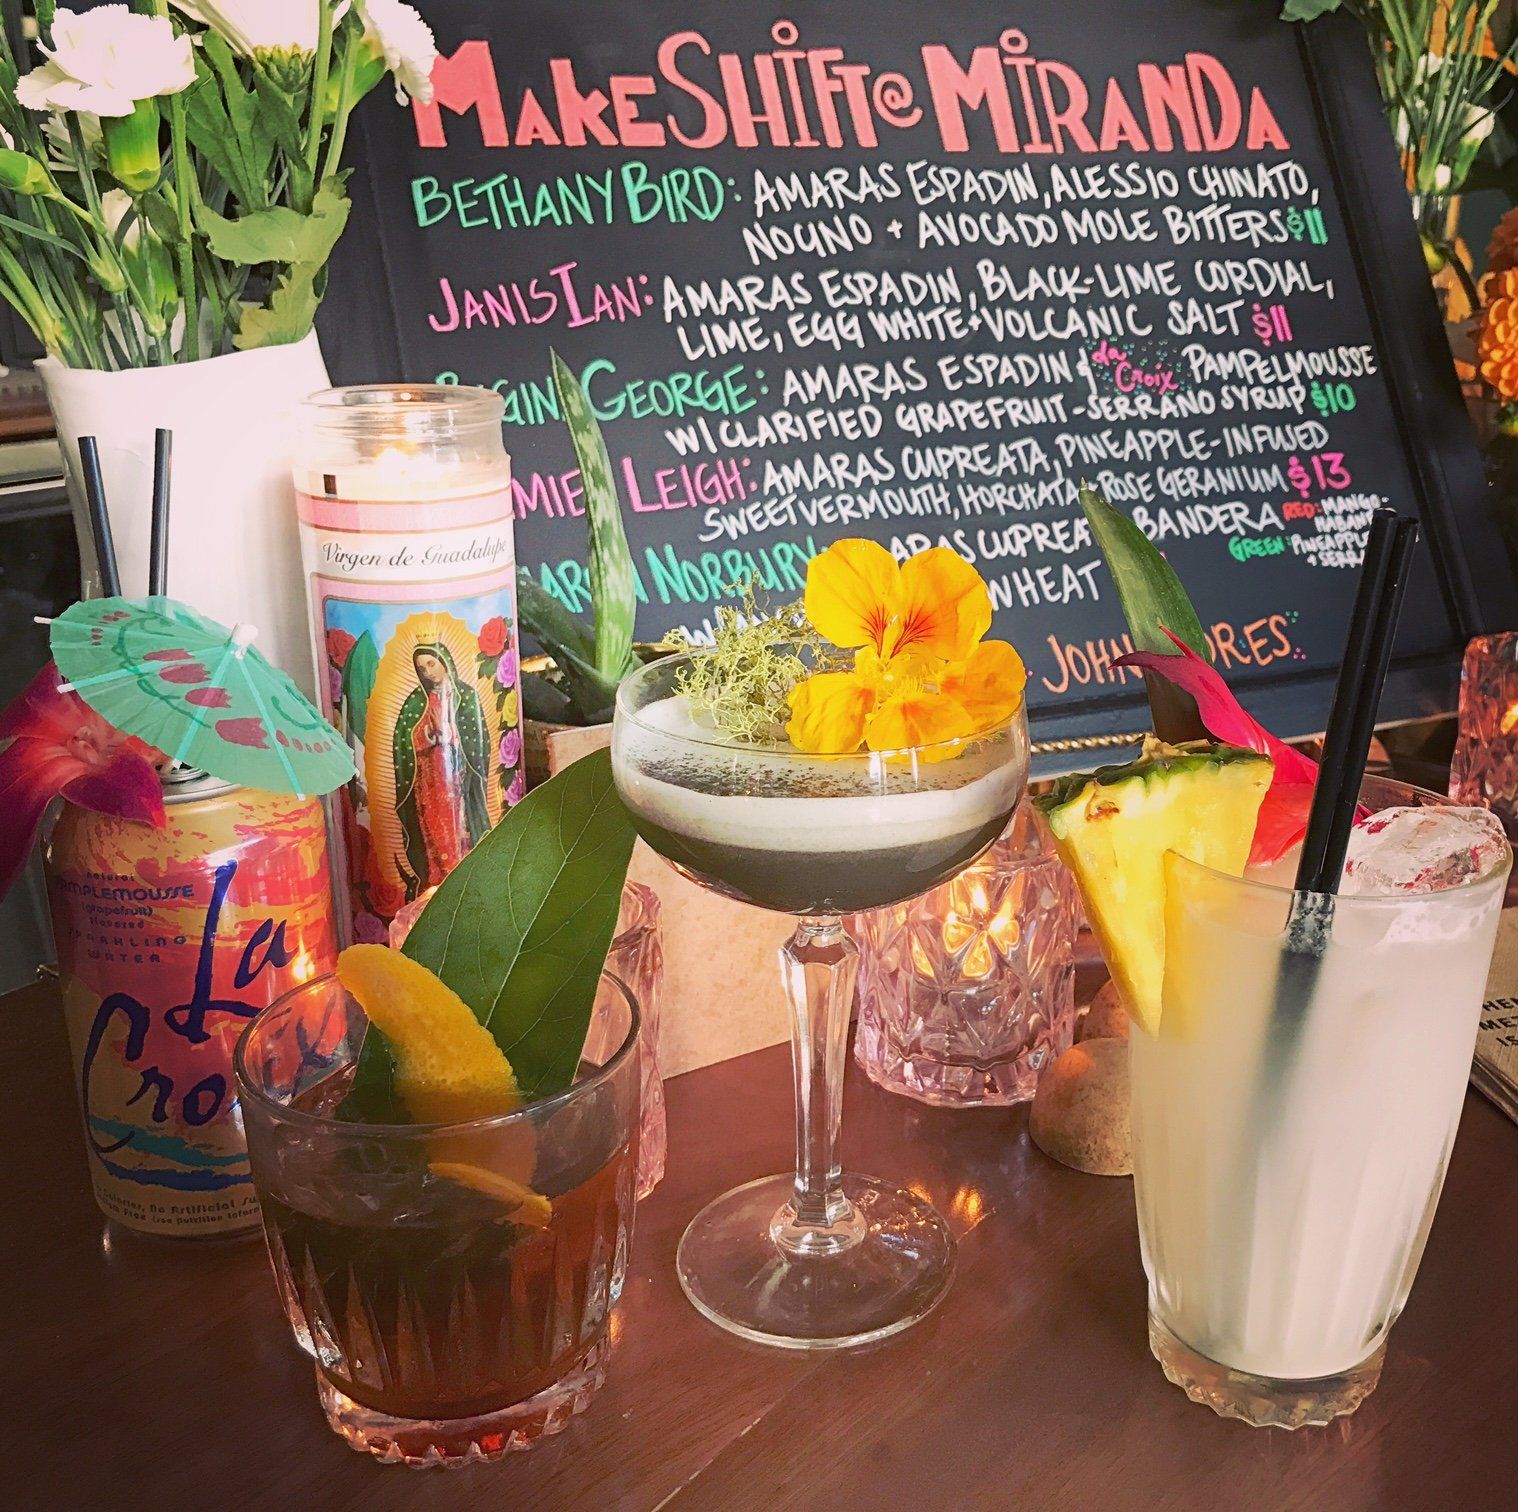 The Miranda, drinks and cocktails